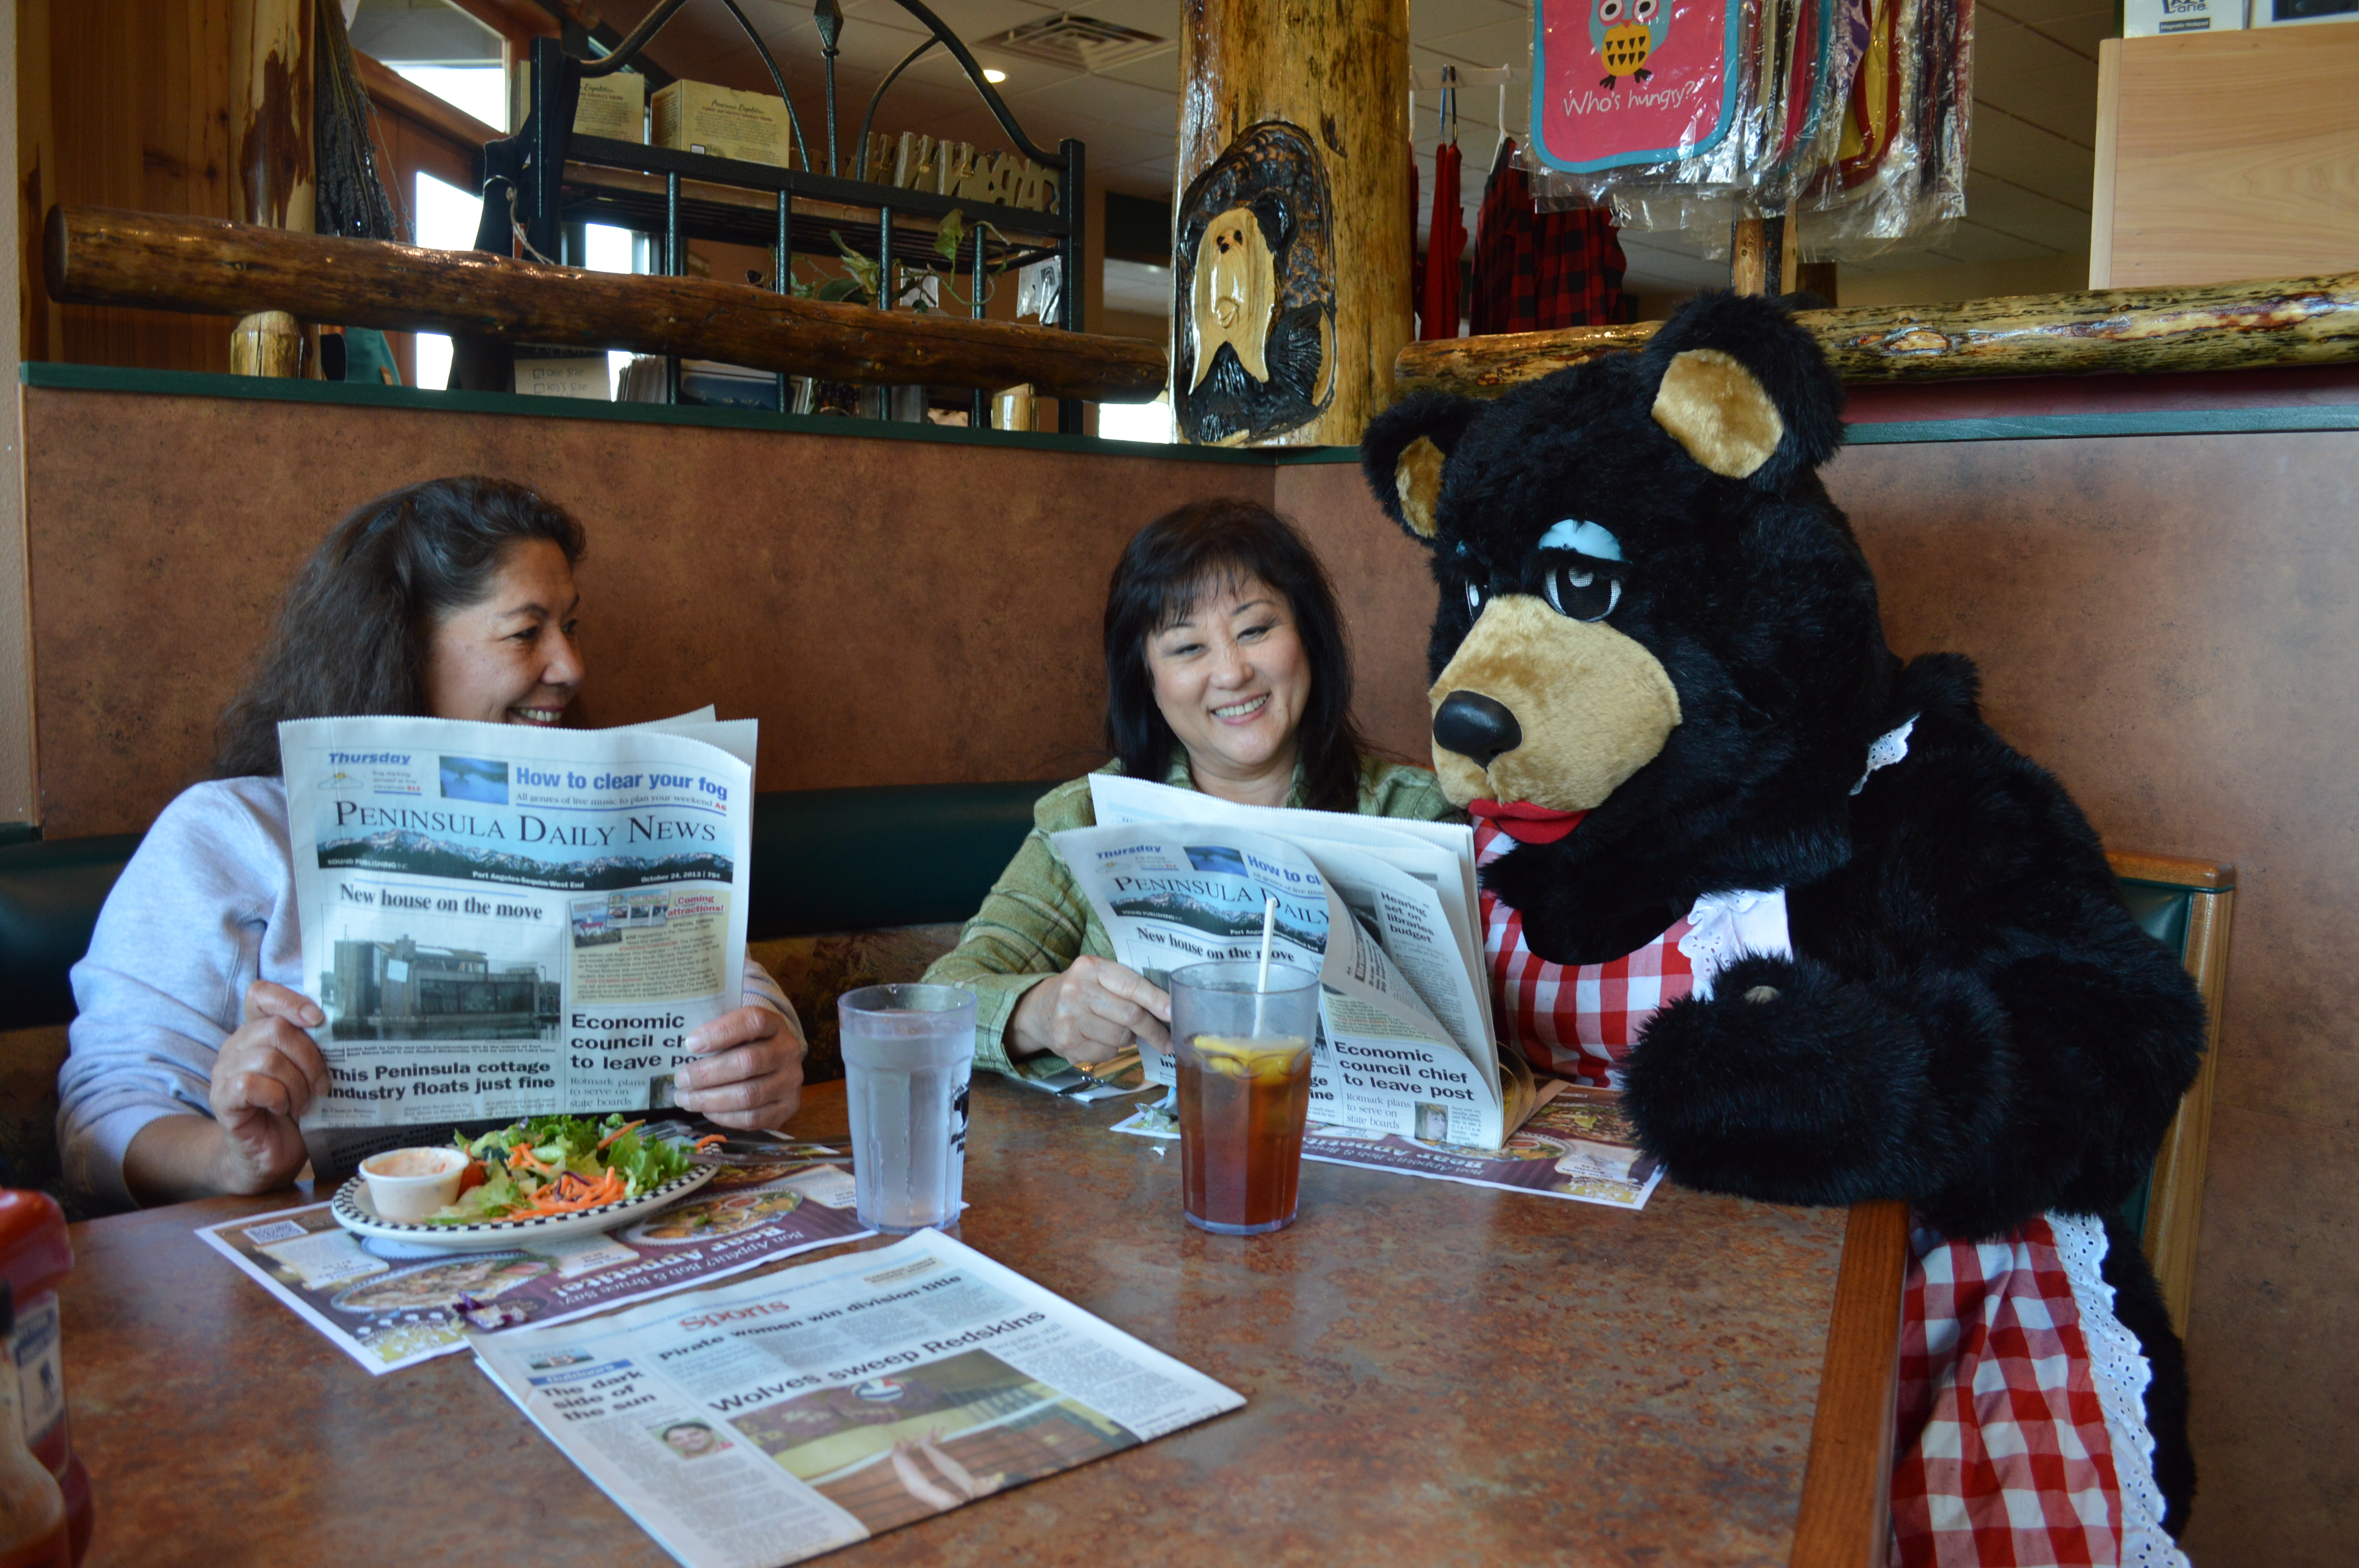 Breakfast special (with a free Peninsula Daily News) continues at 'The Bear' in Sequim